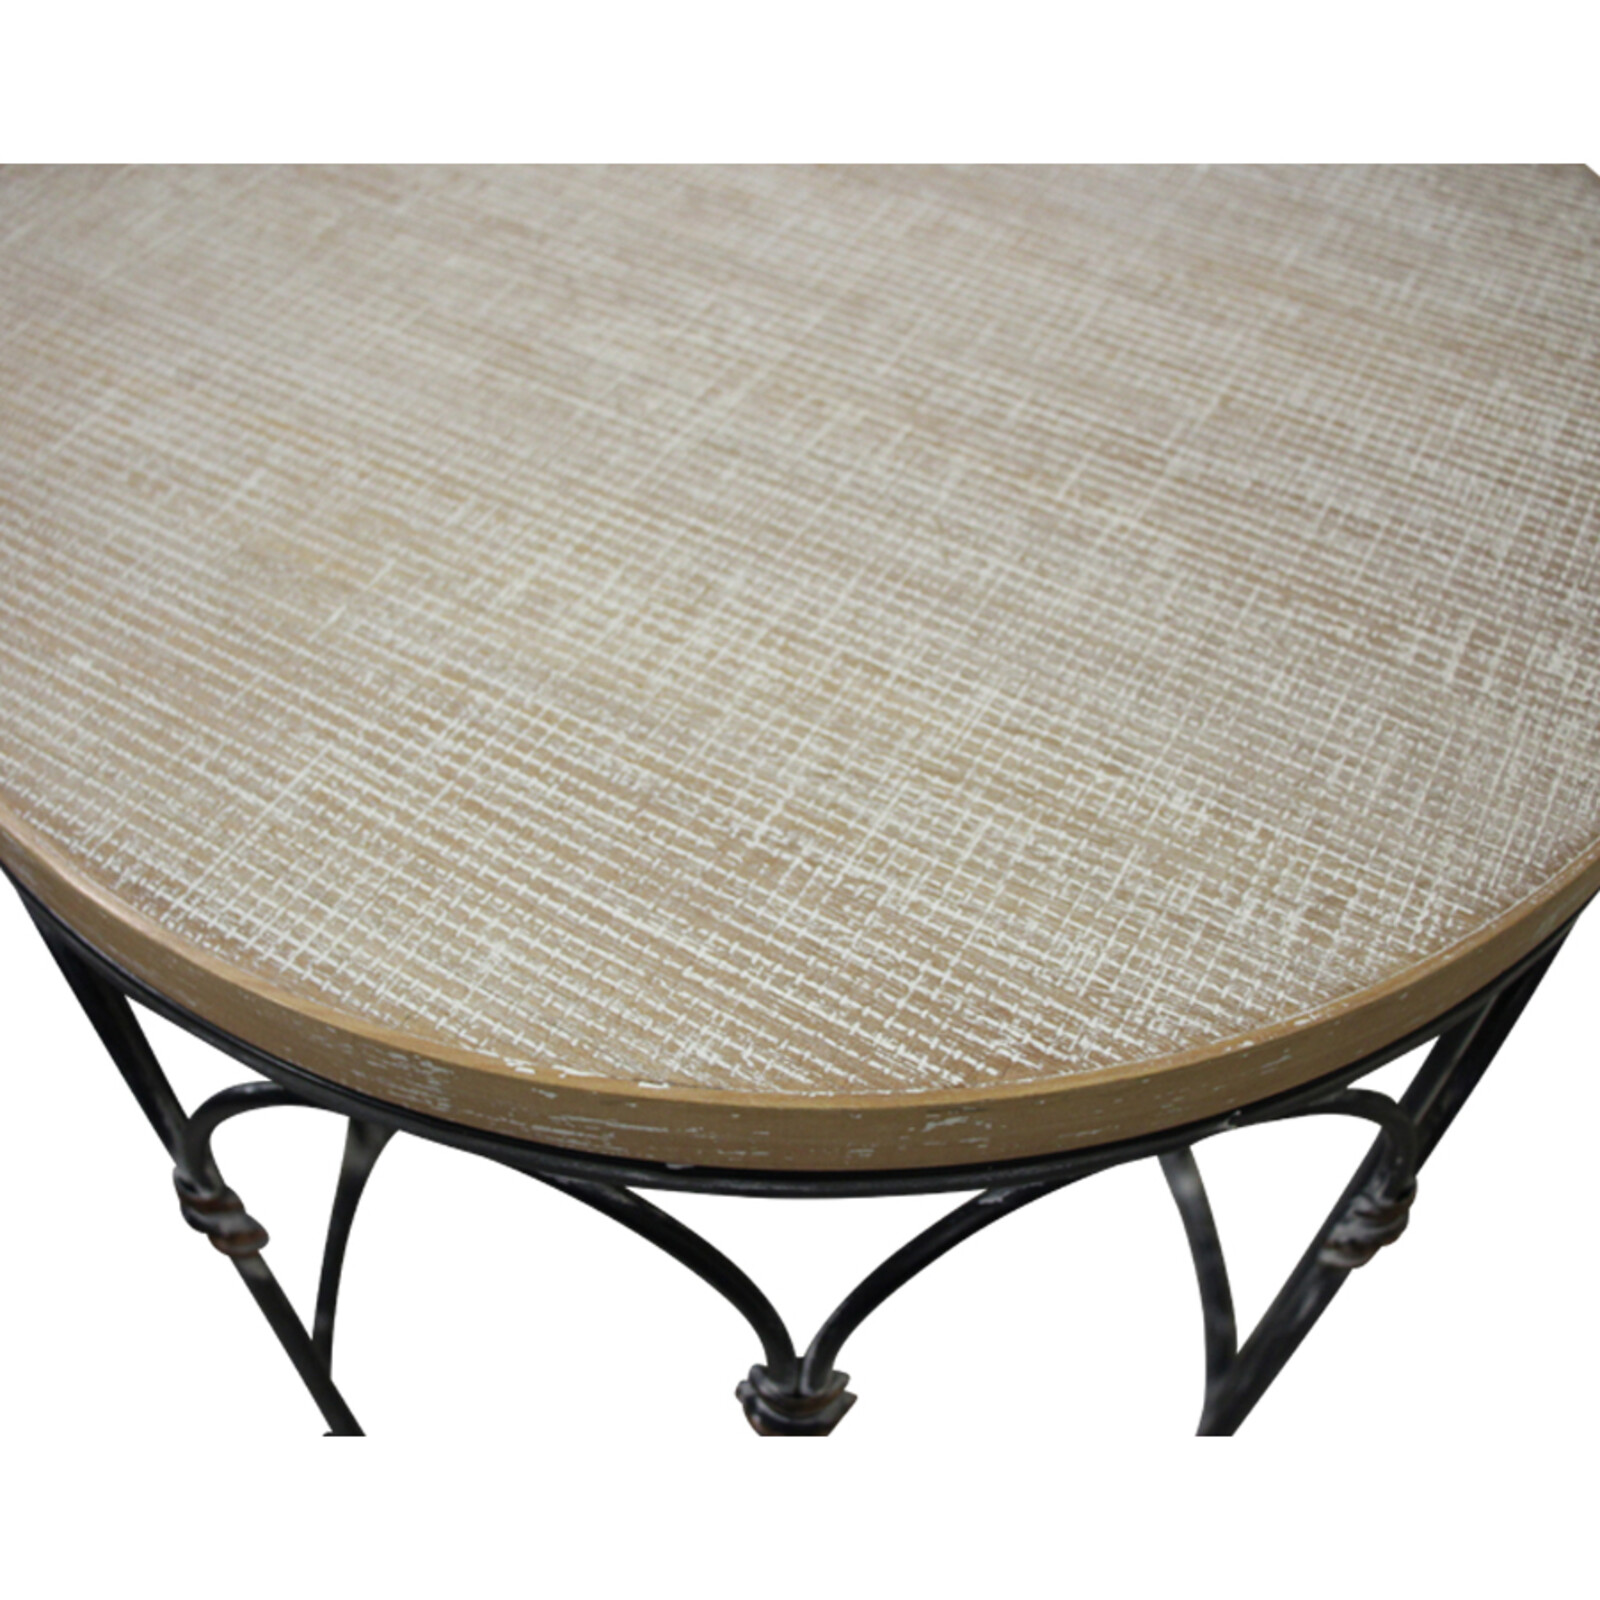 S/2 Tables Crosshatch